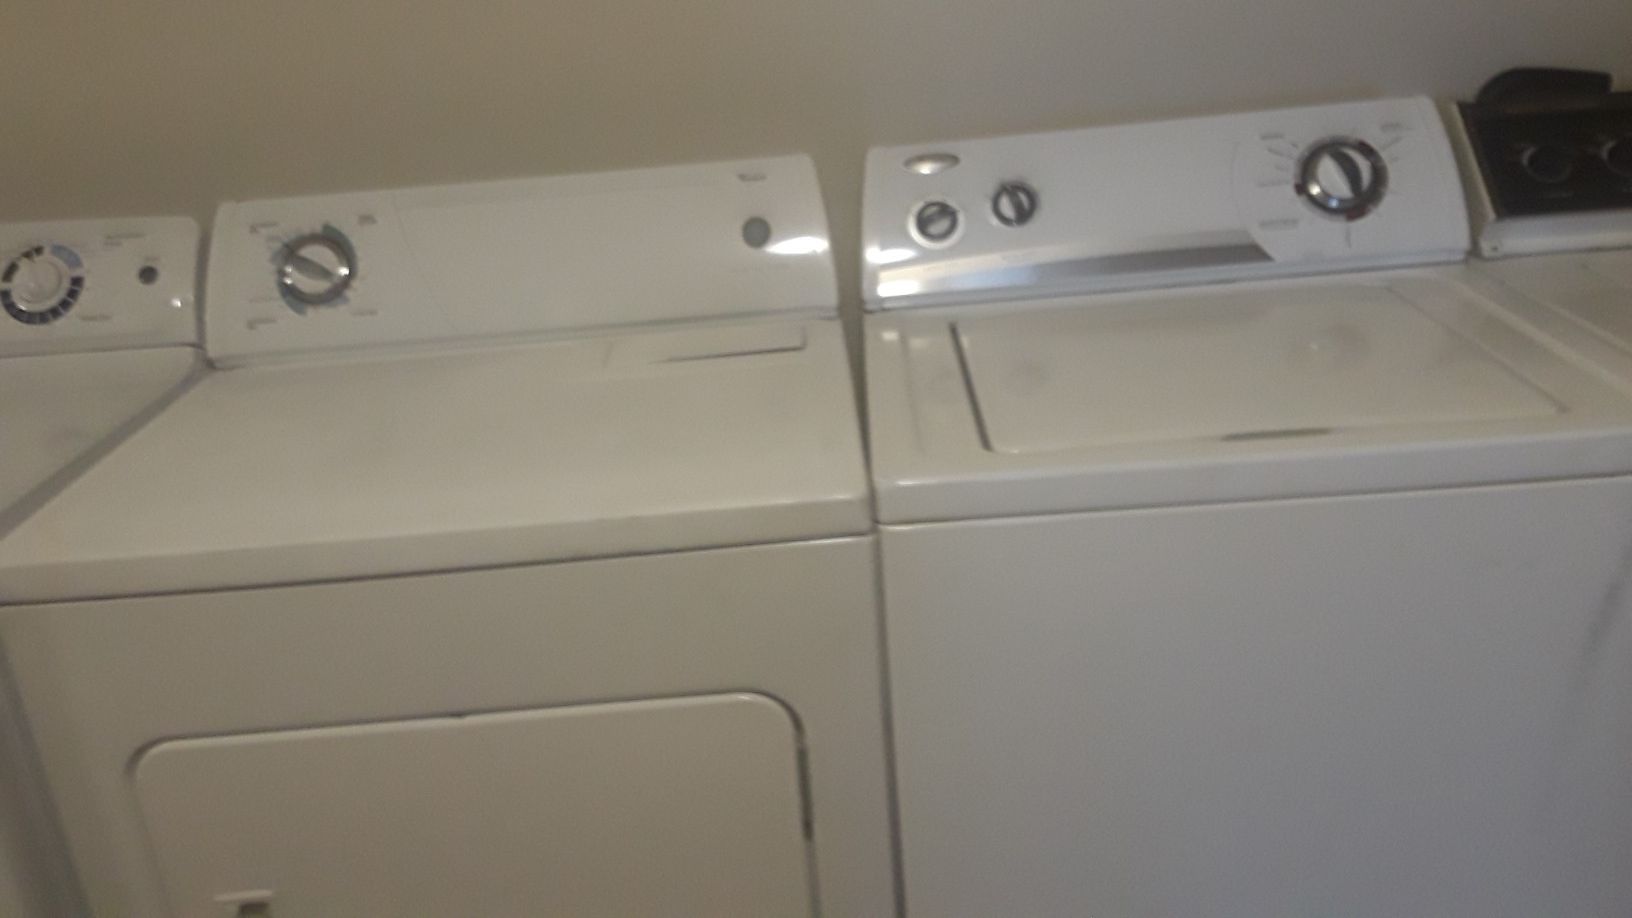 WHIRLPOOL WASHER AND DRYER SET